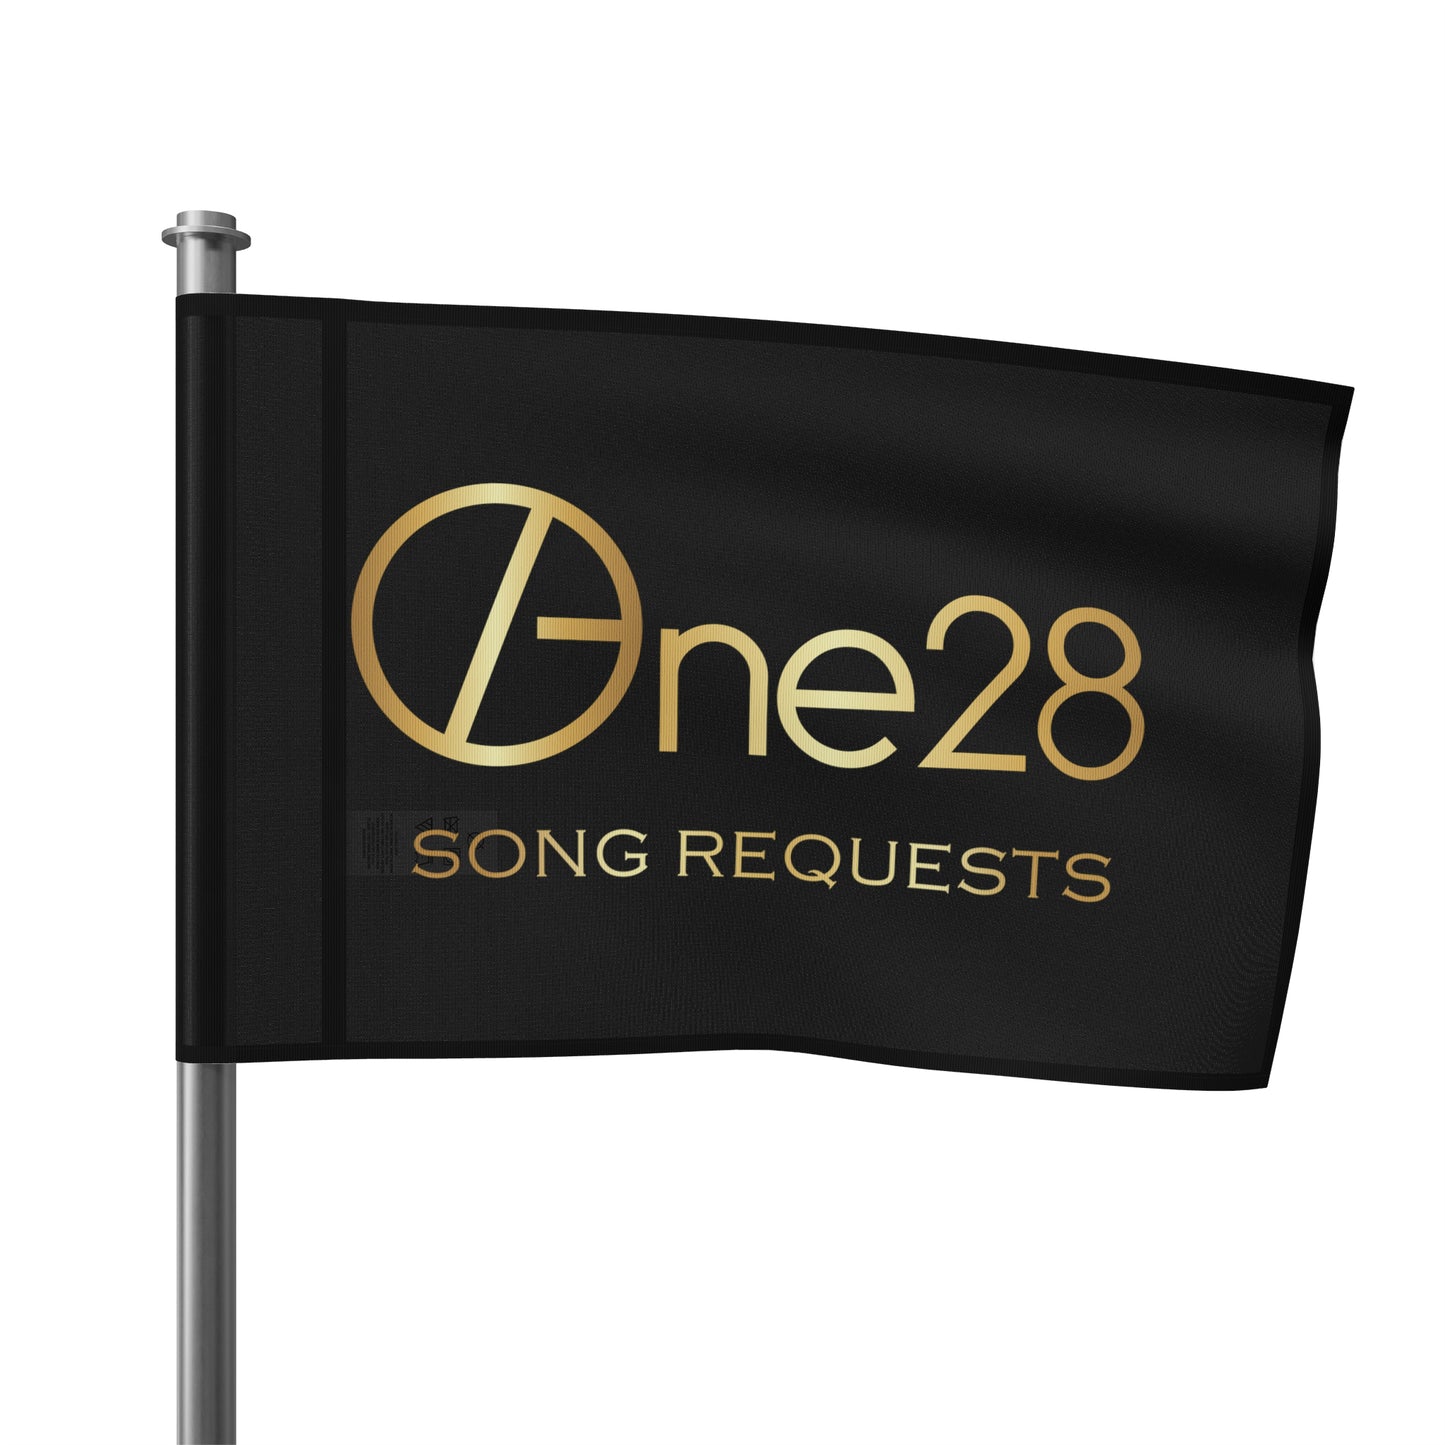 One28 Song Requests - Flag